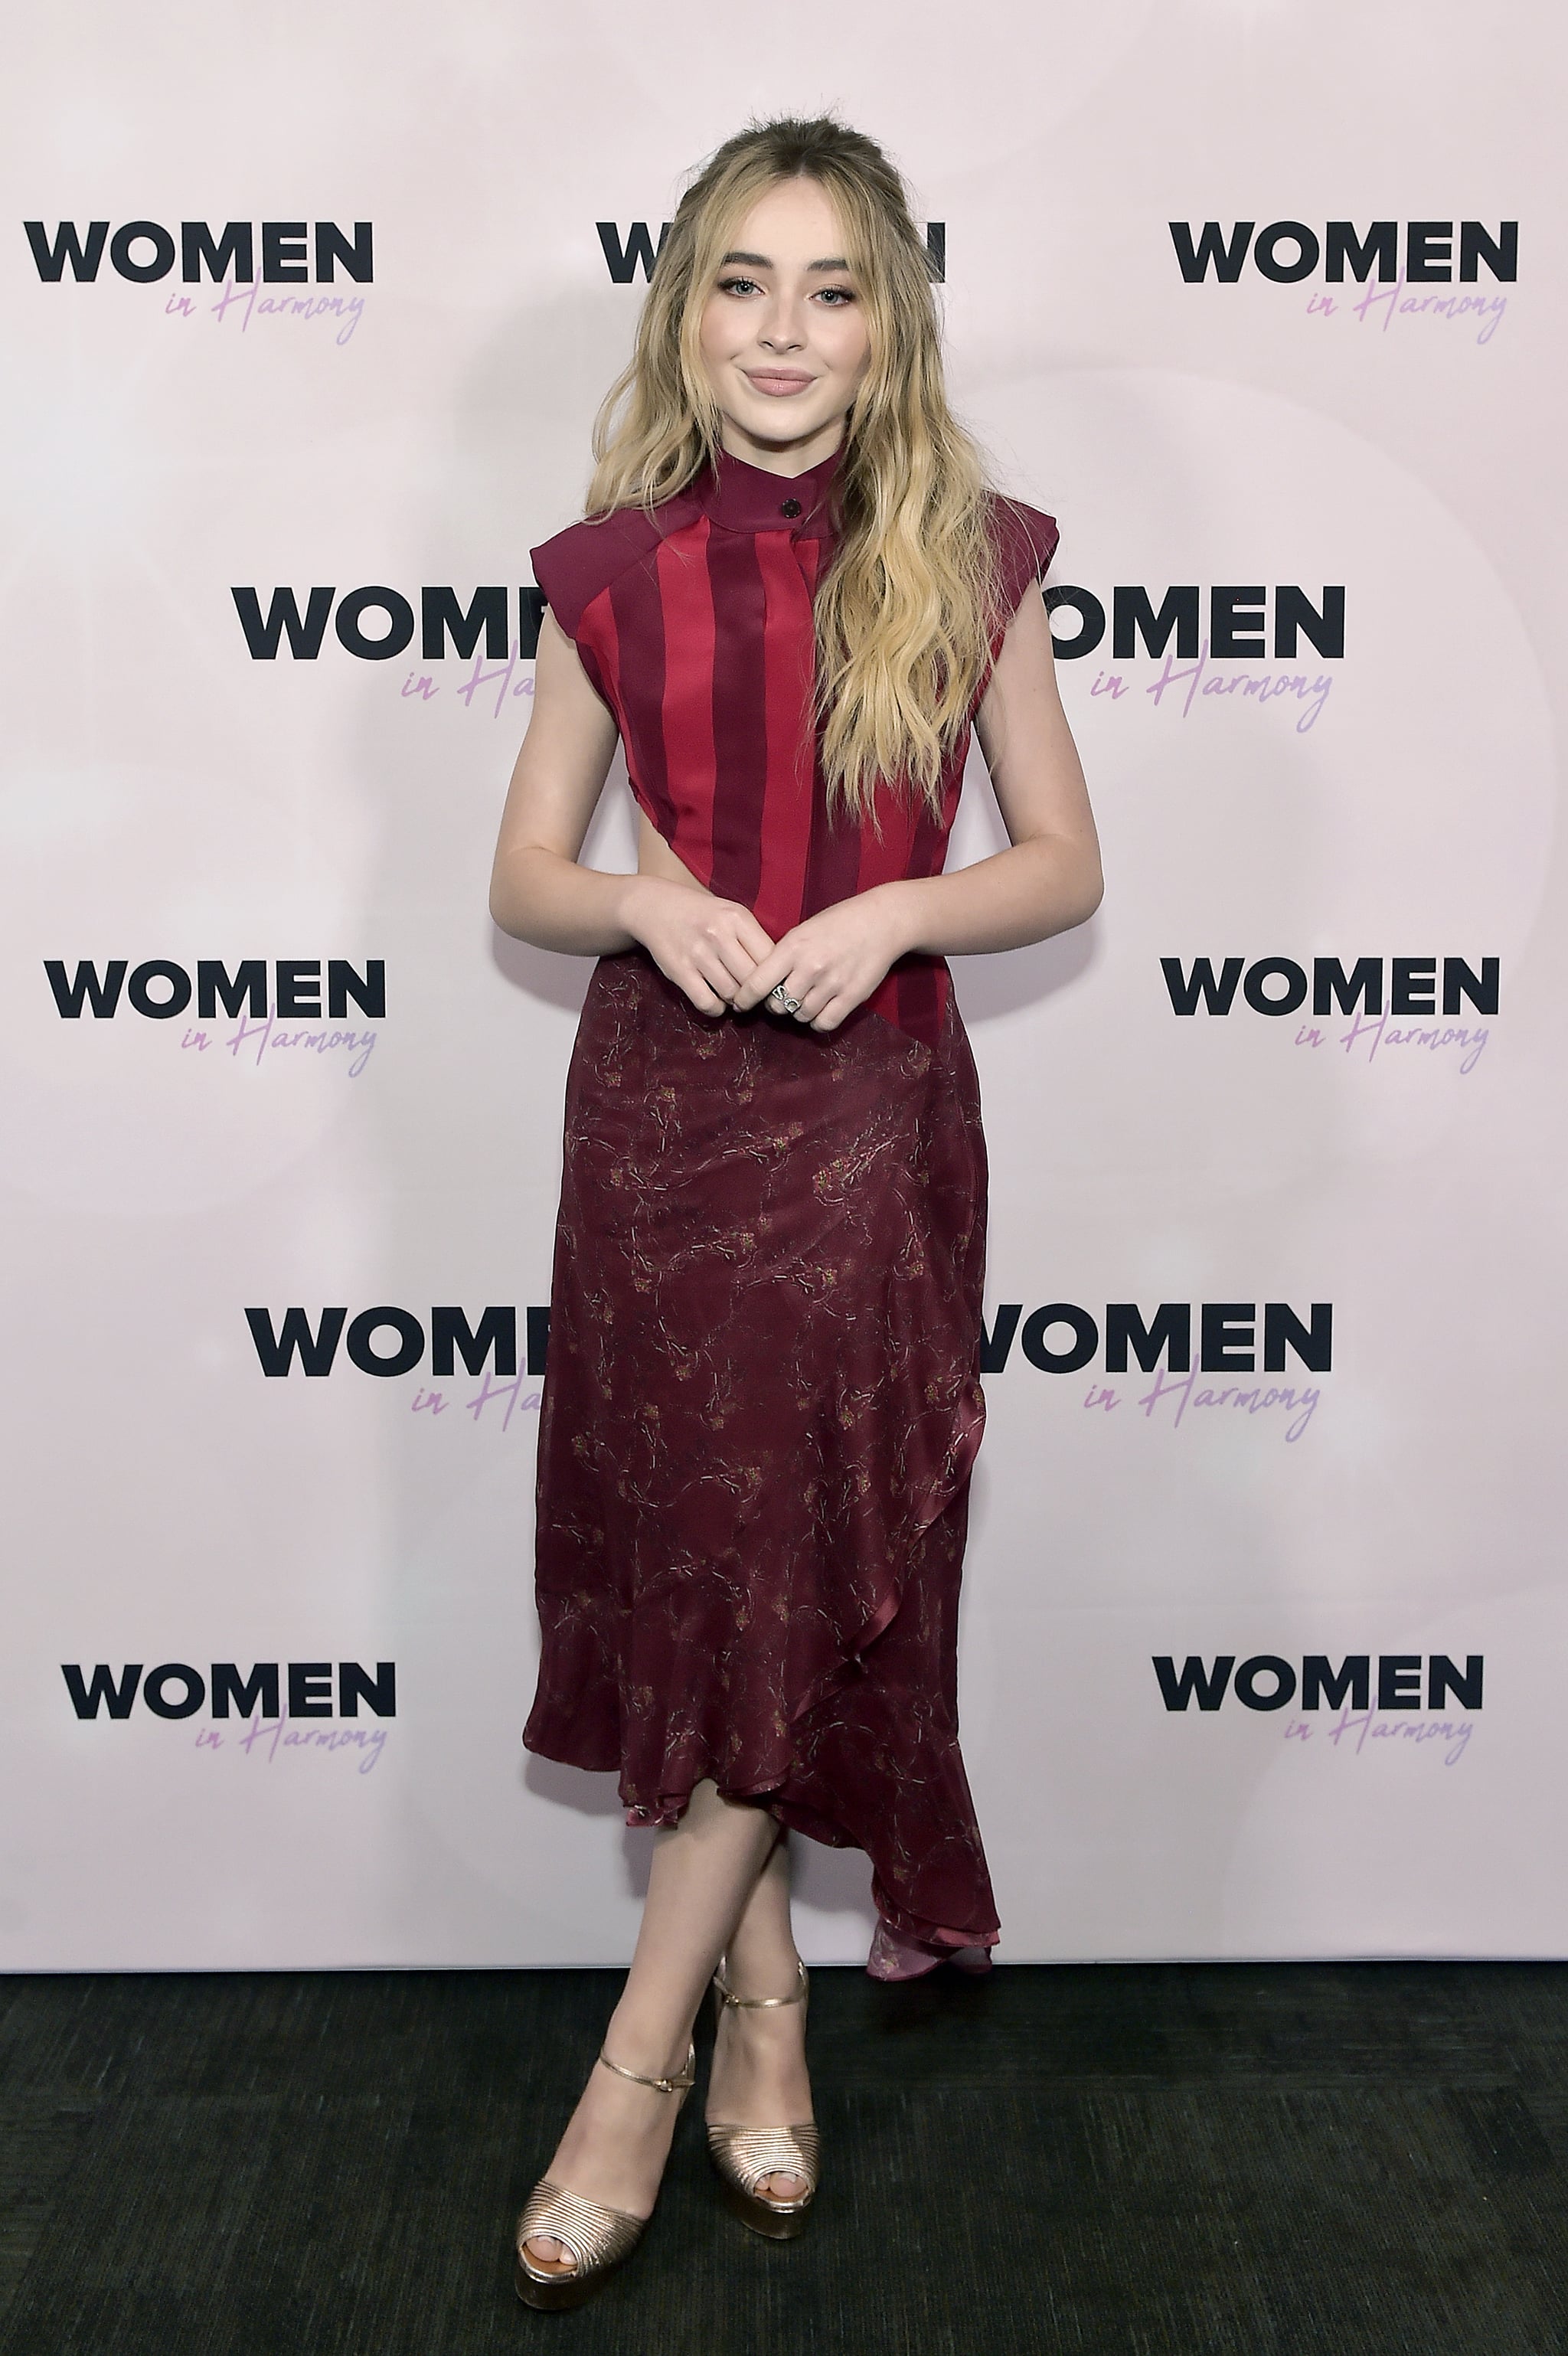 LOS ANGELES, CALIFORNIA - JANUARY 24: Sabrina Carpenter attends the 3rd Annual Women in Harmony Pre-Grammy Luncheon with Host Bebe Rexha on January 24, 2020 in Los Angeles, California. (Photo by Stefanie Keenan/Getty Images for Bebe Rexha & Women in Harmony)